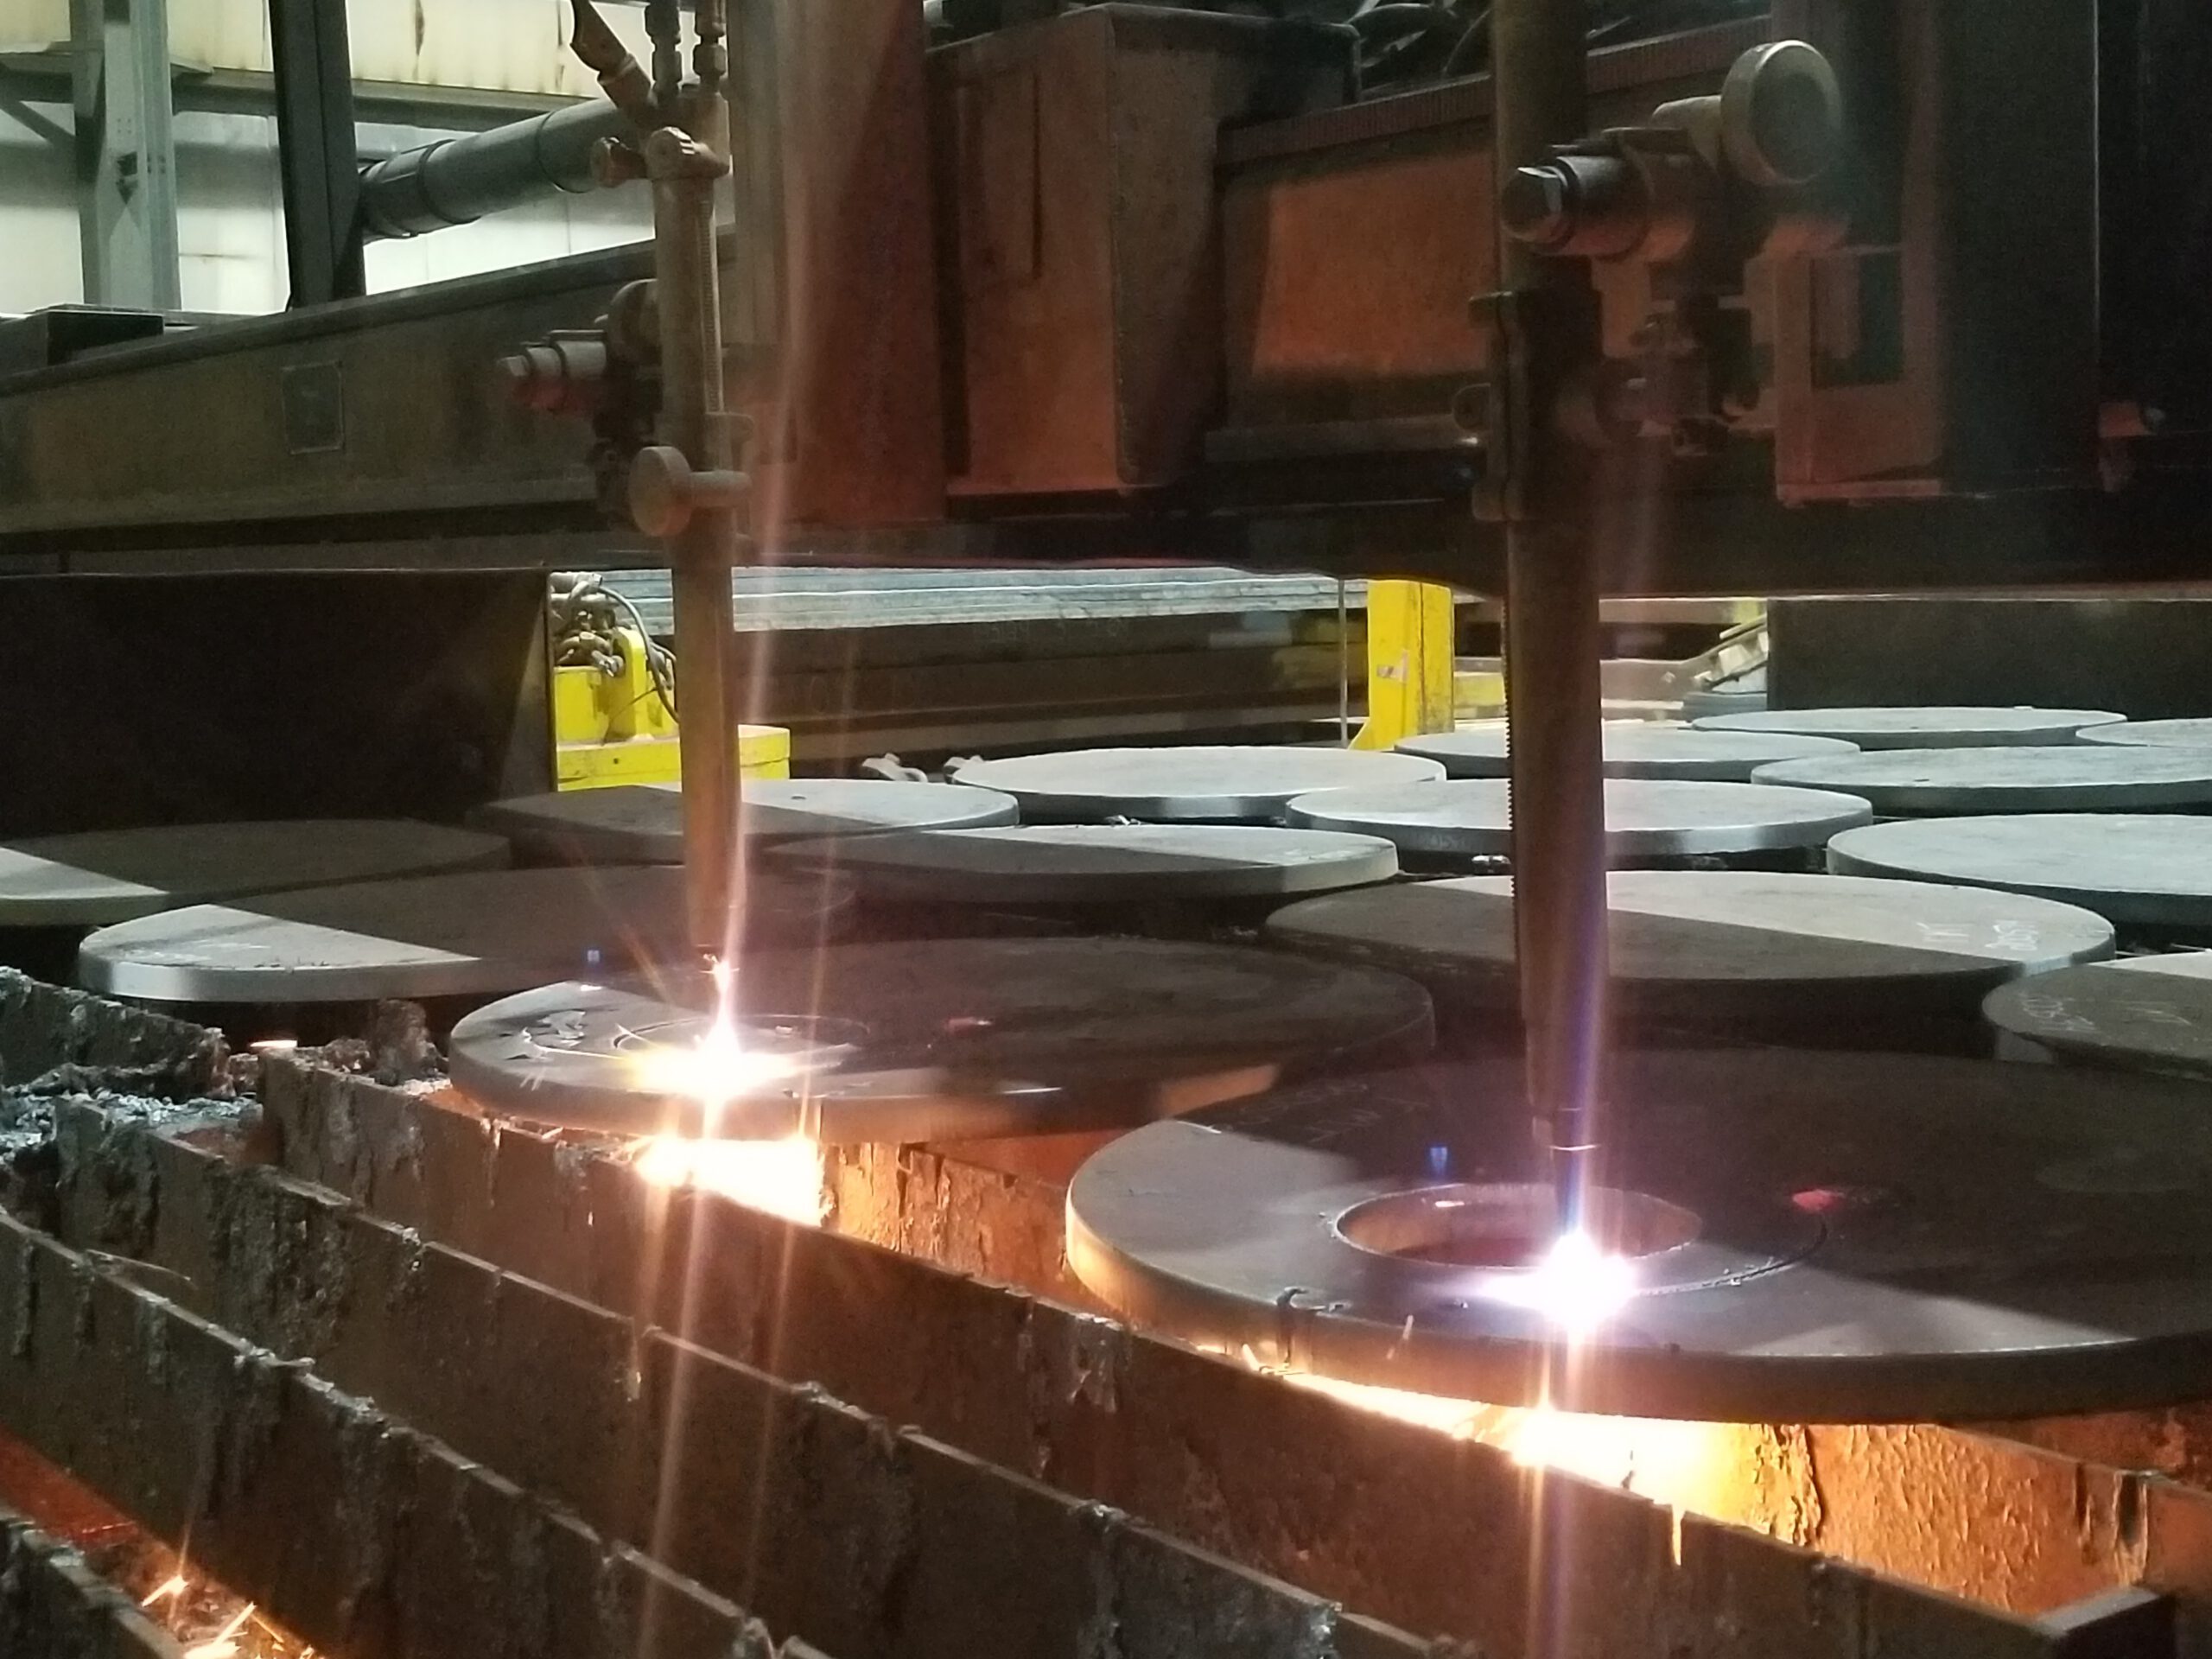 Profile Cutting with oxy 2 torches at Quality Plates & Profiles